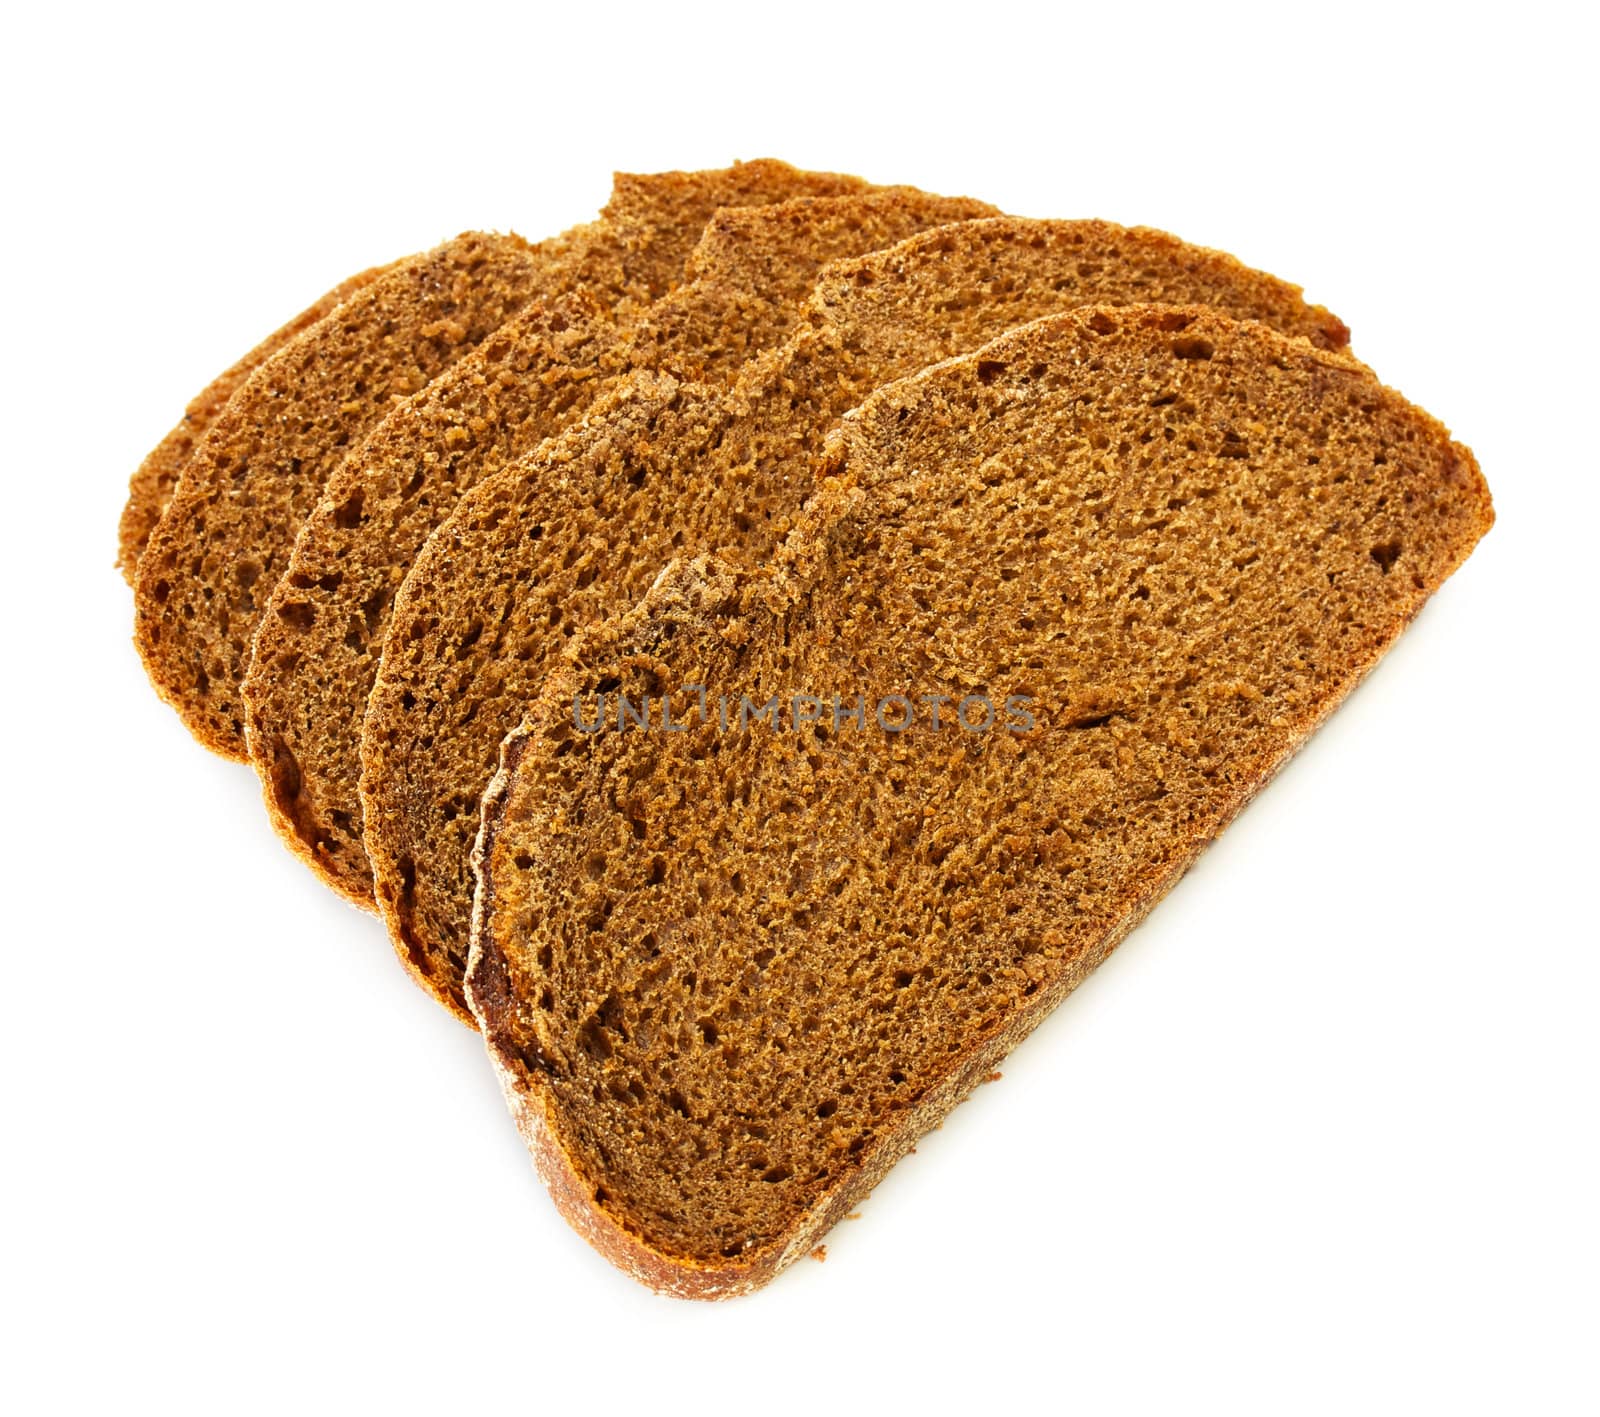 pieces of rye bread isolated on white background